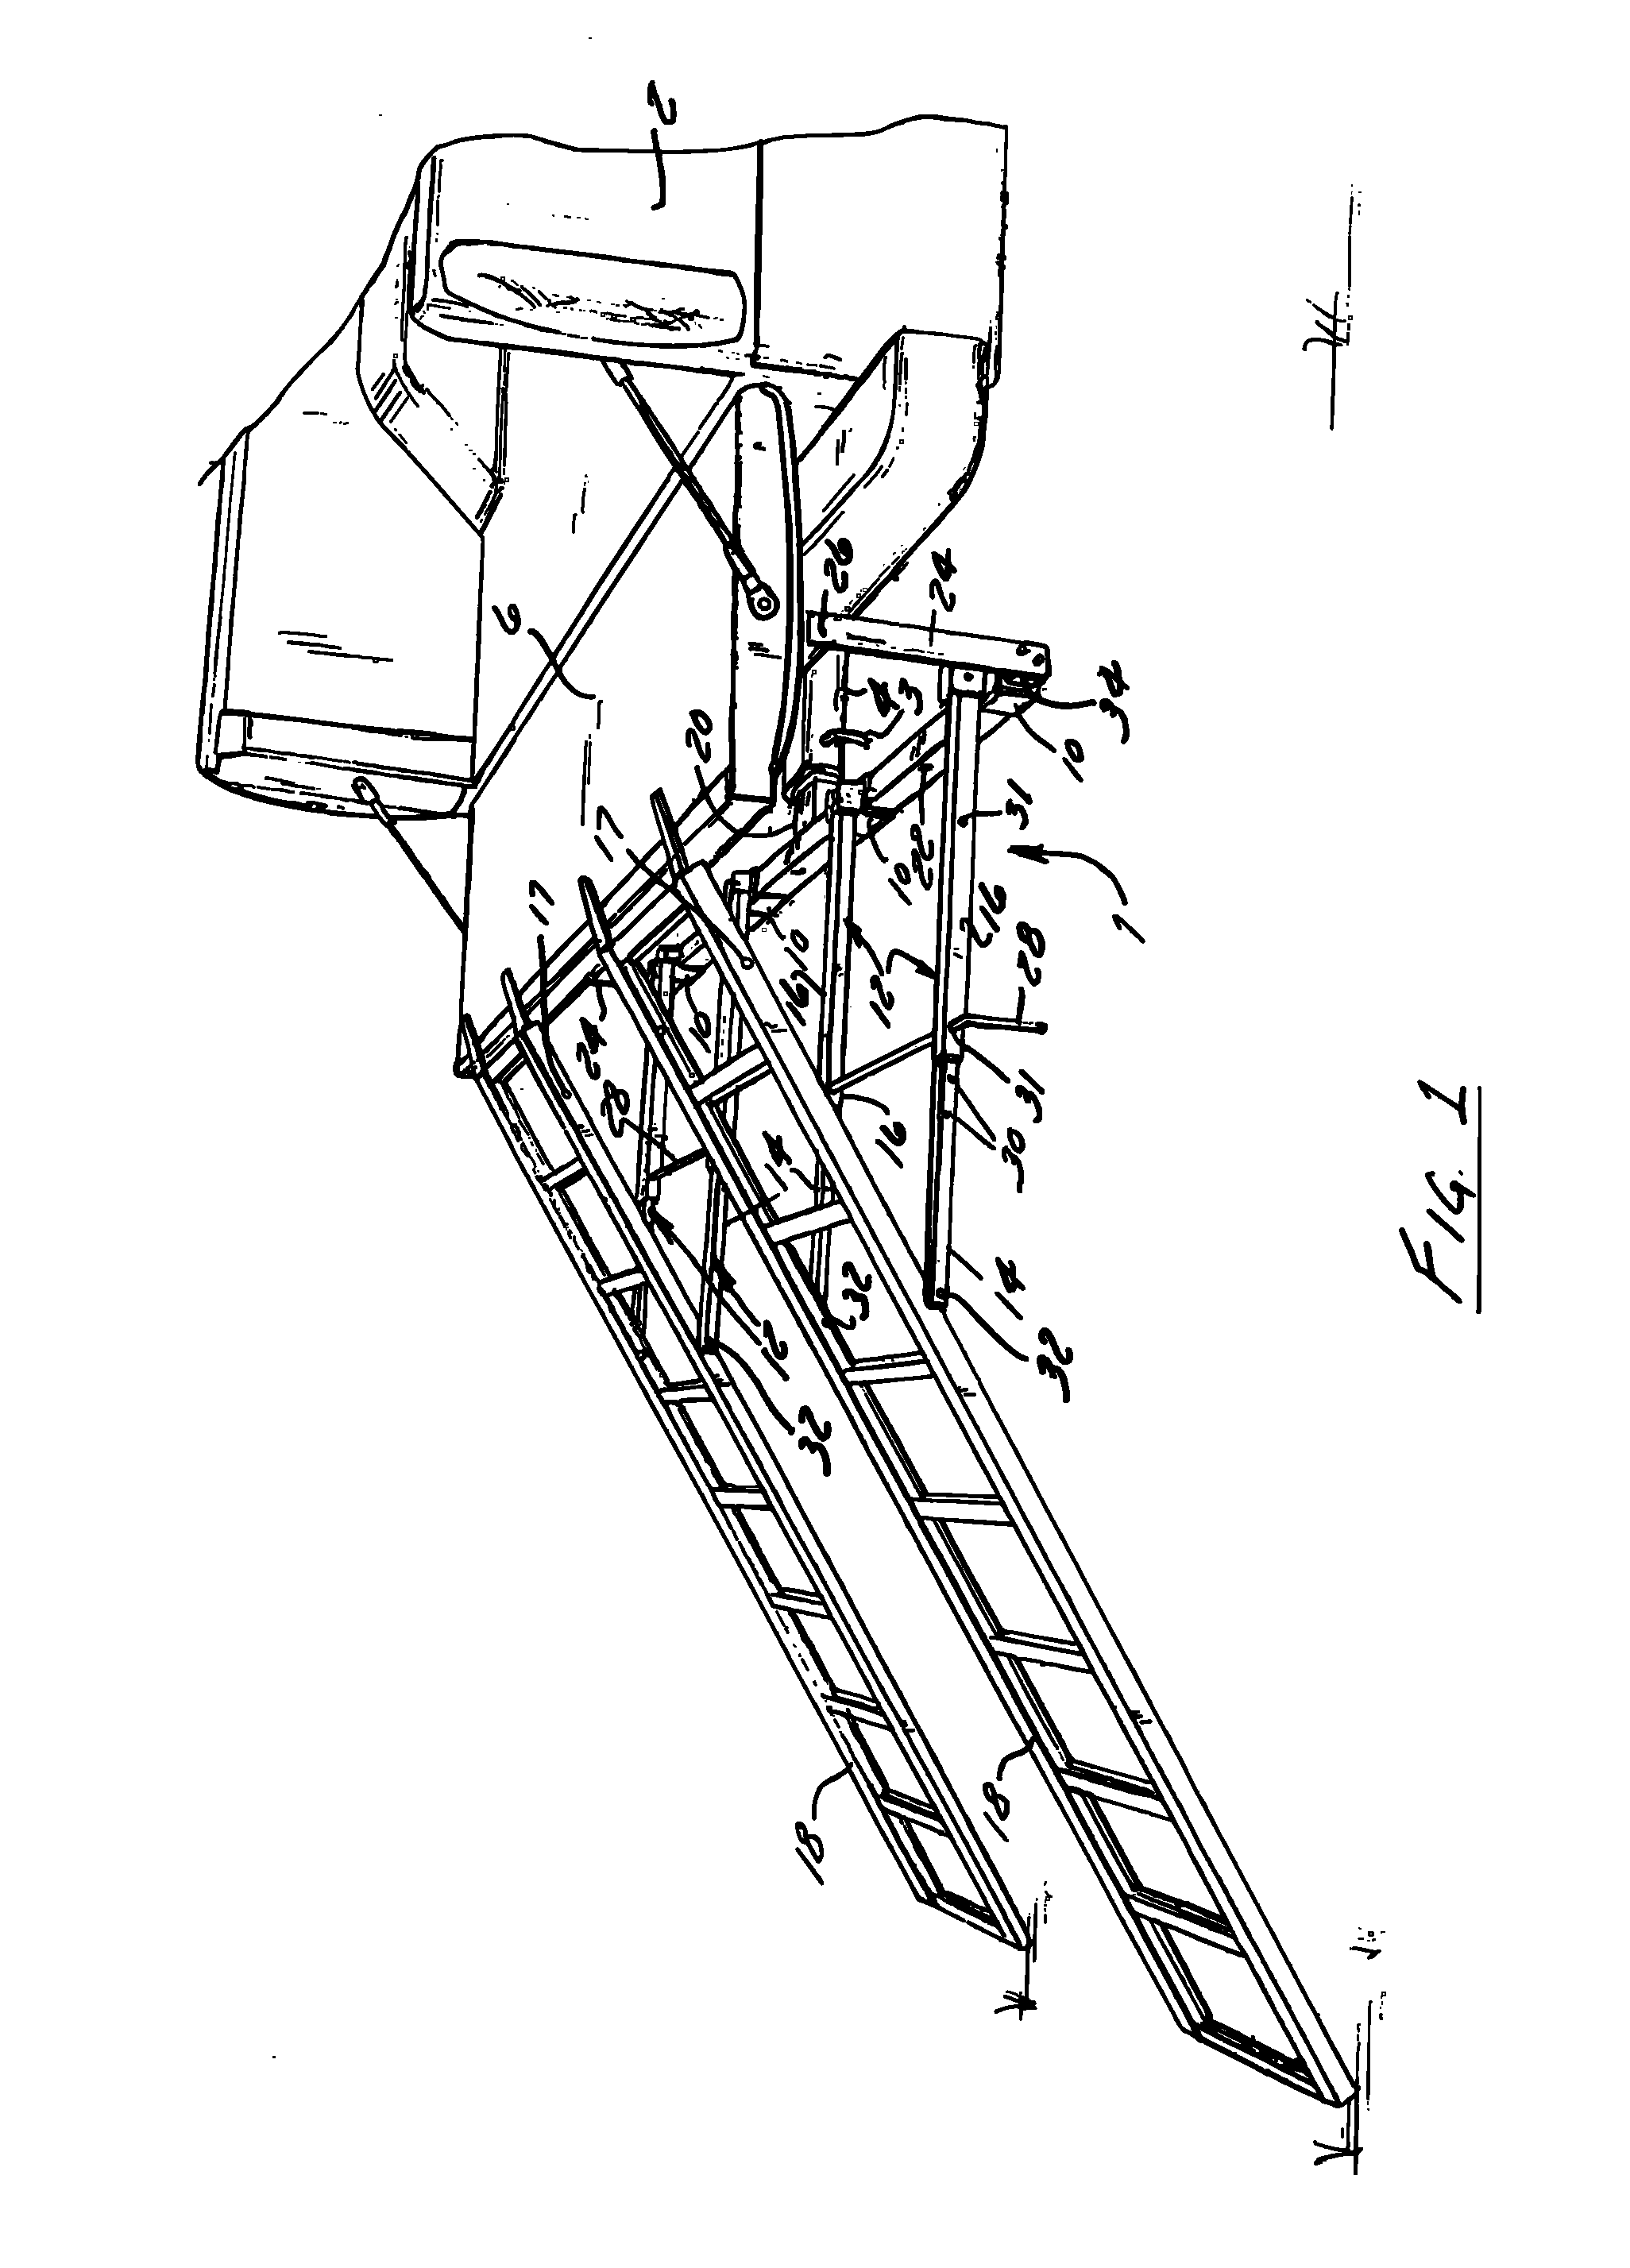 Apparatus and method for loading and unloading cargo